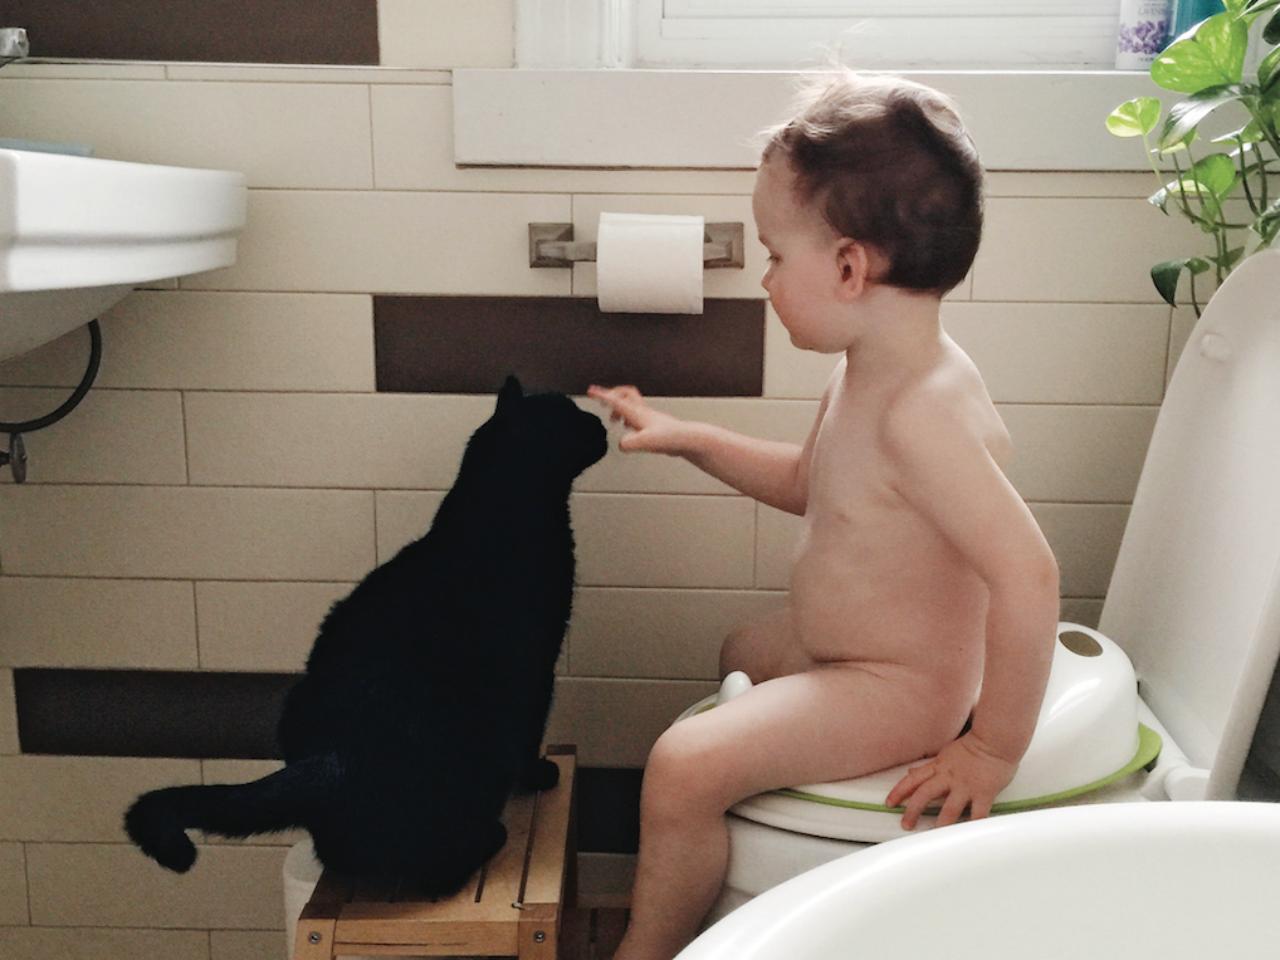 A little boy sitting on the toilet petting a cat